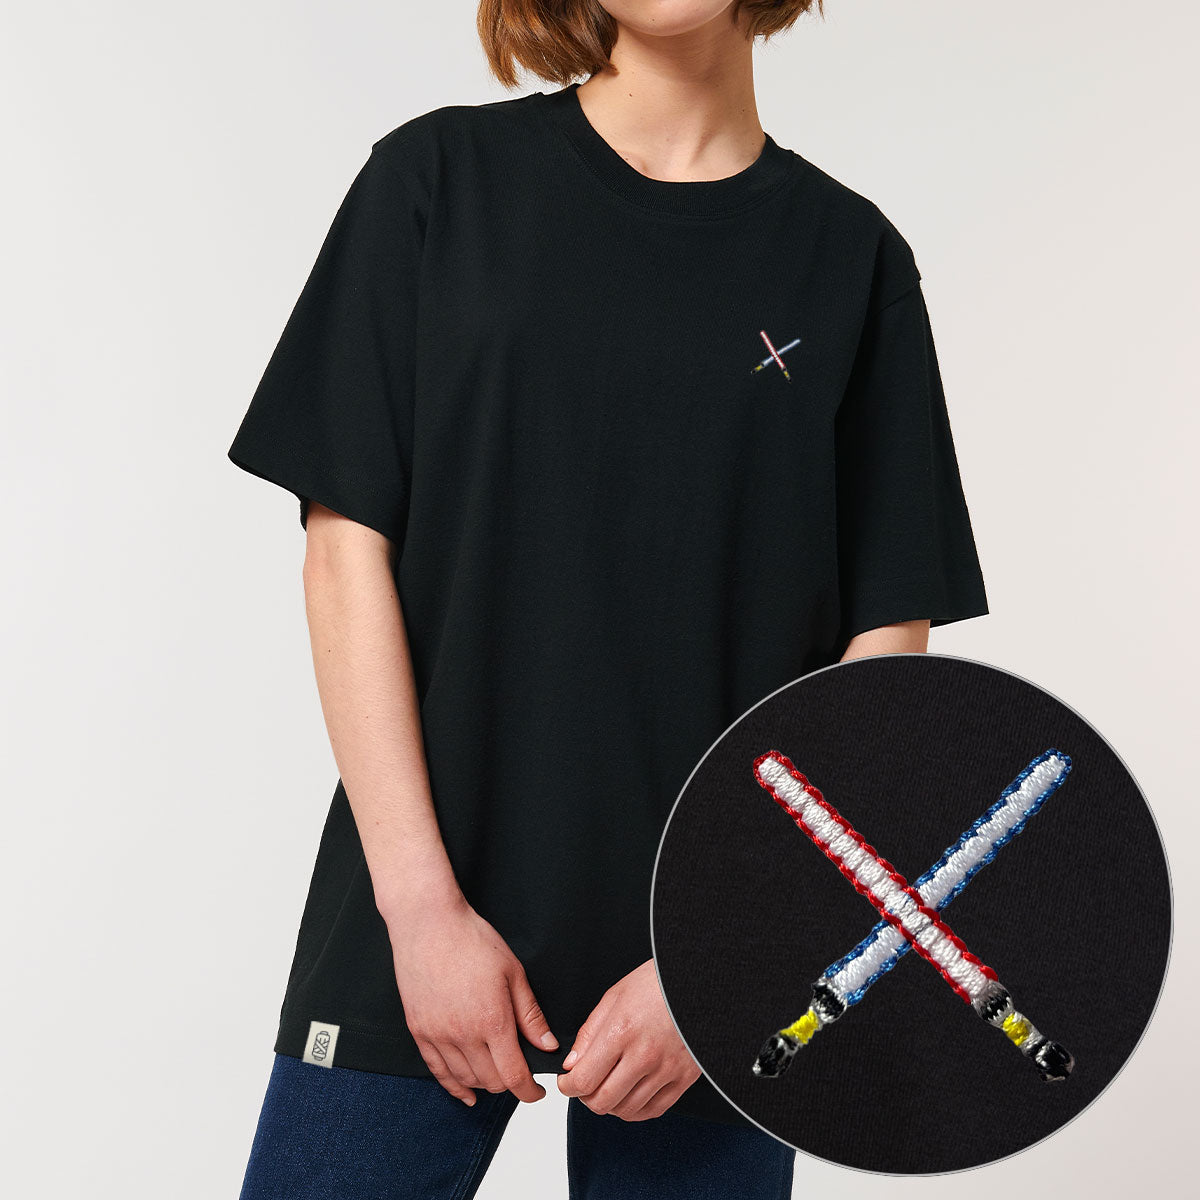 Intergalactic Swords Embroidered T-Shirt (Unisex)